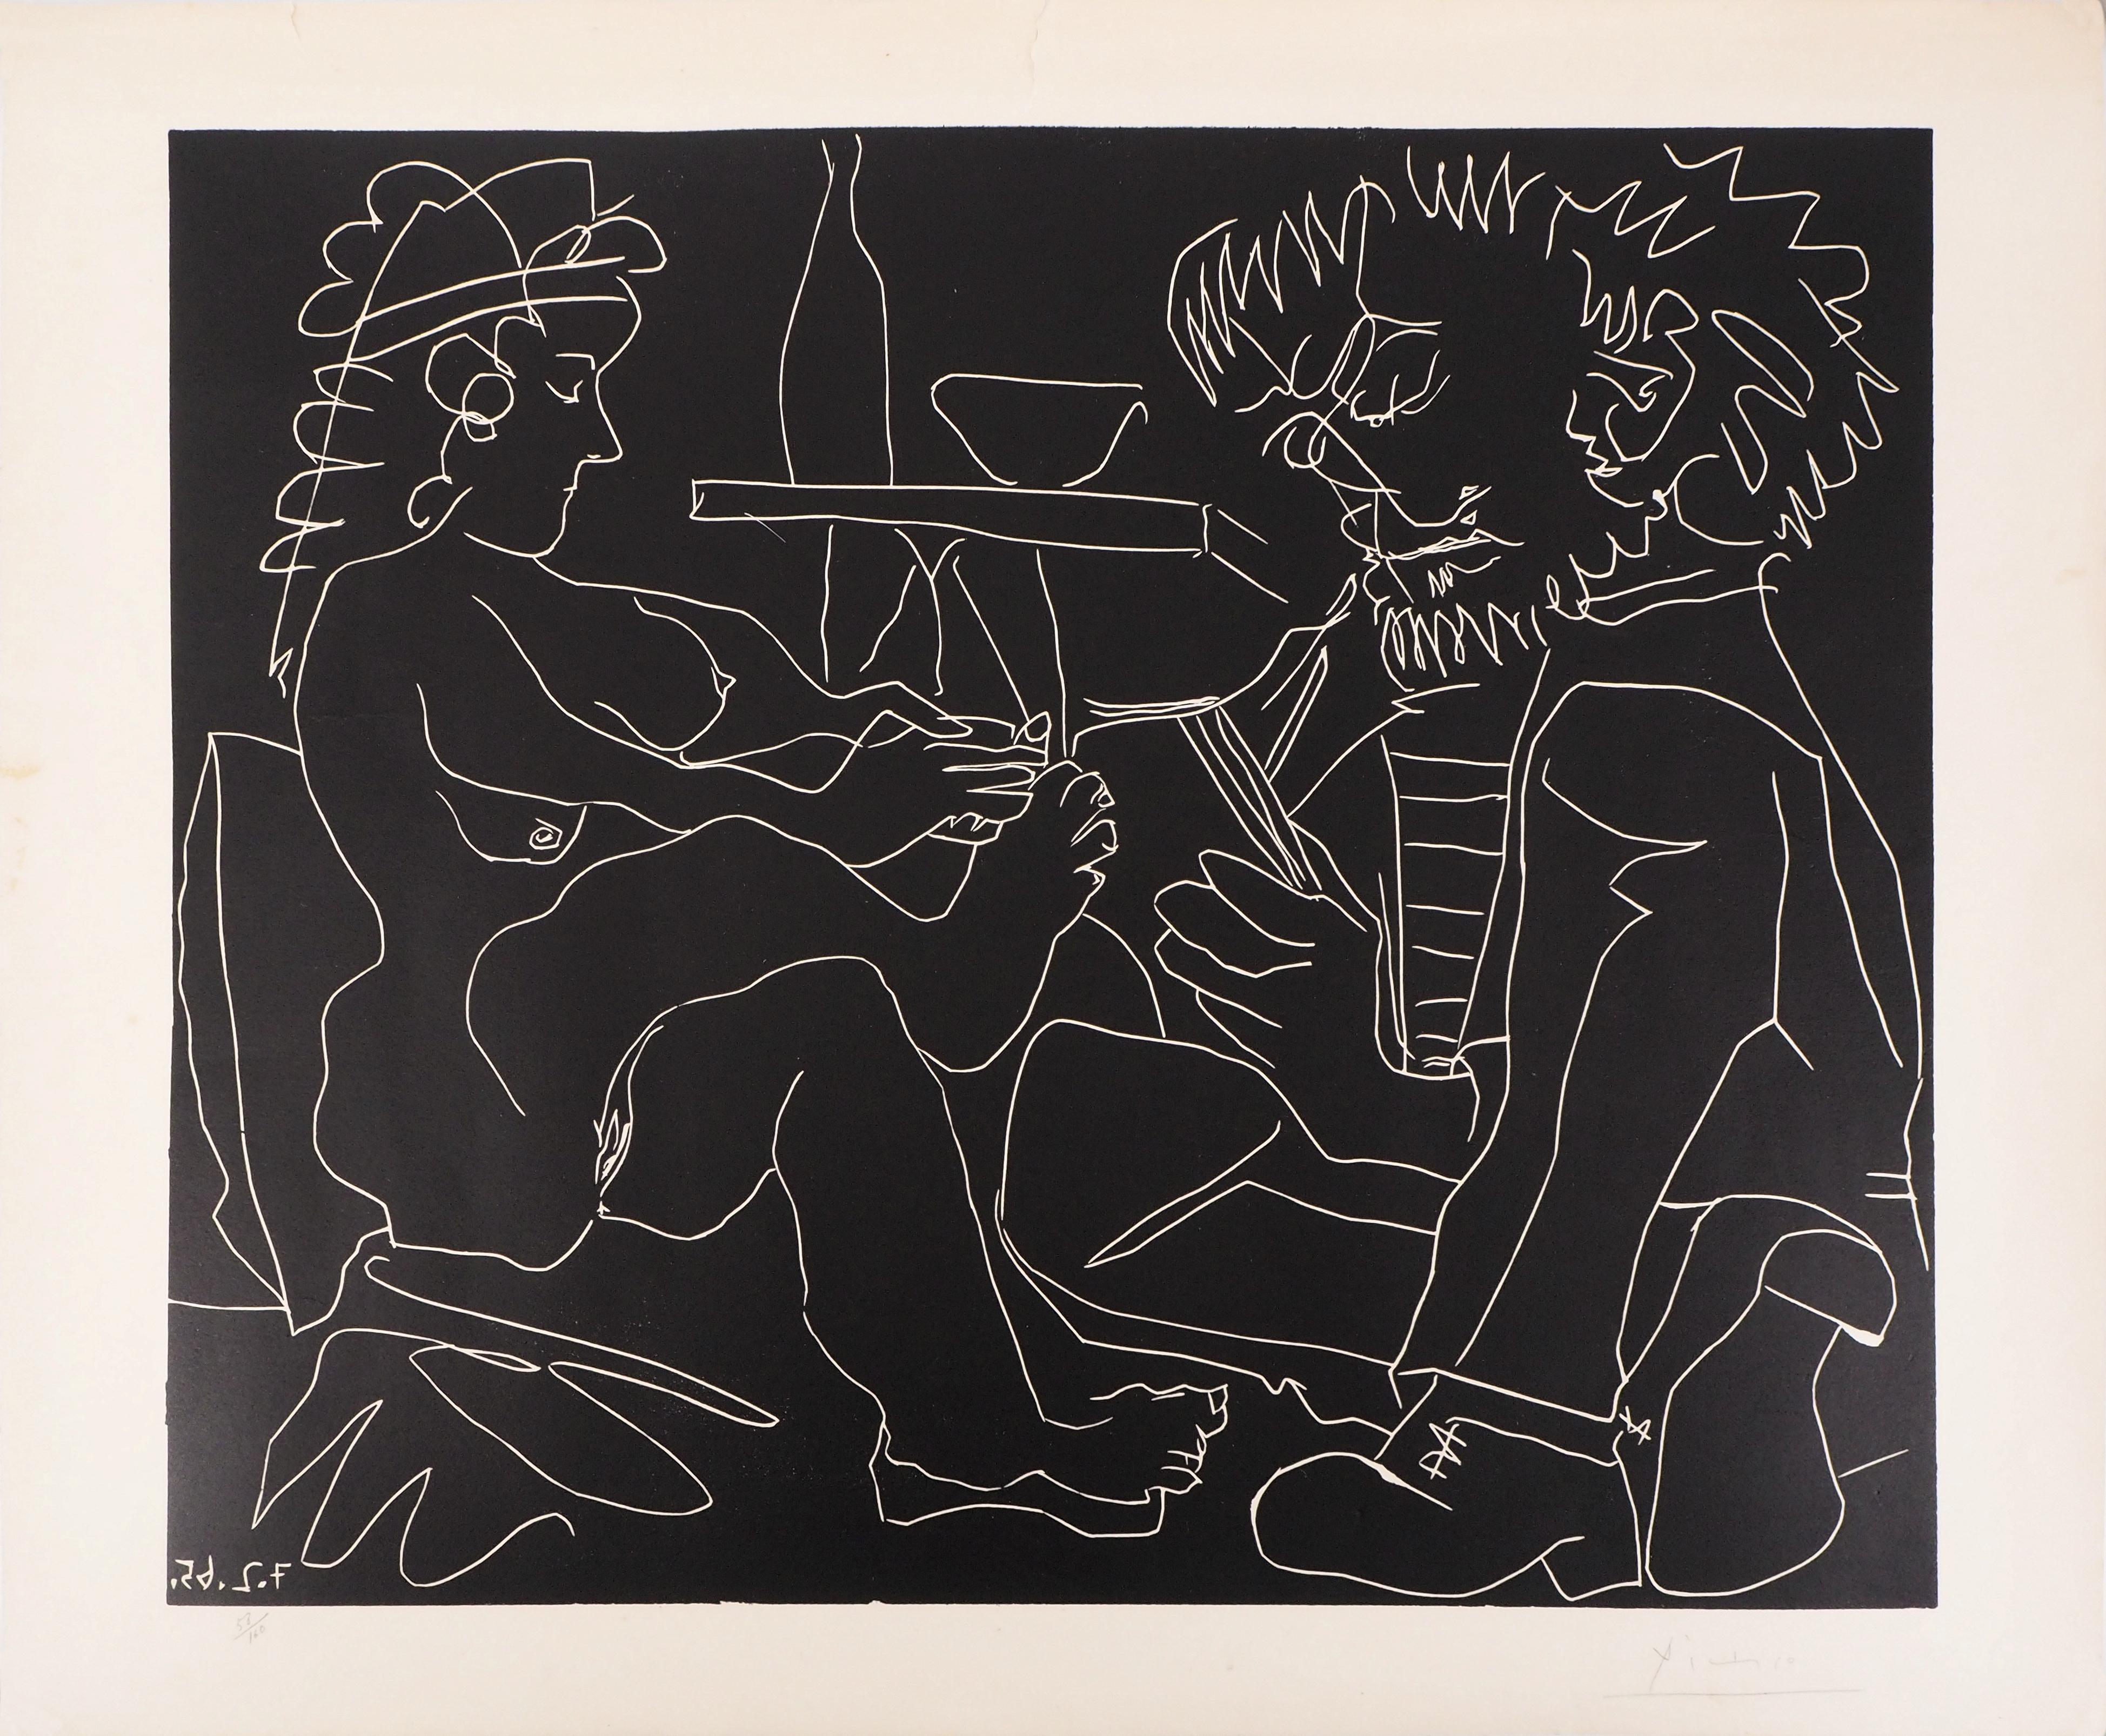 Pablo Picasso Figurative Print - Painter and Model with Hat - Original linocut, Handsigned (ref. Bloch #1194)